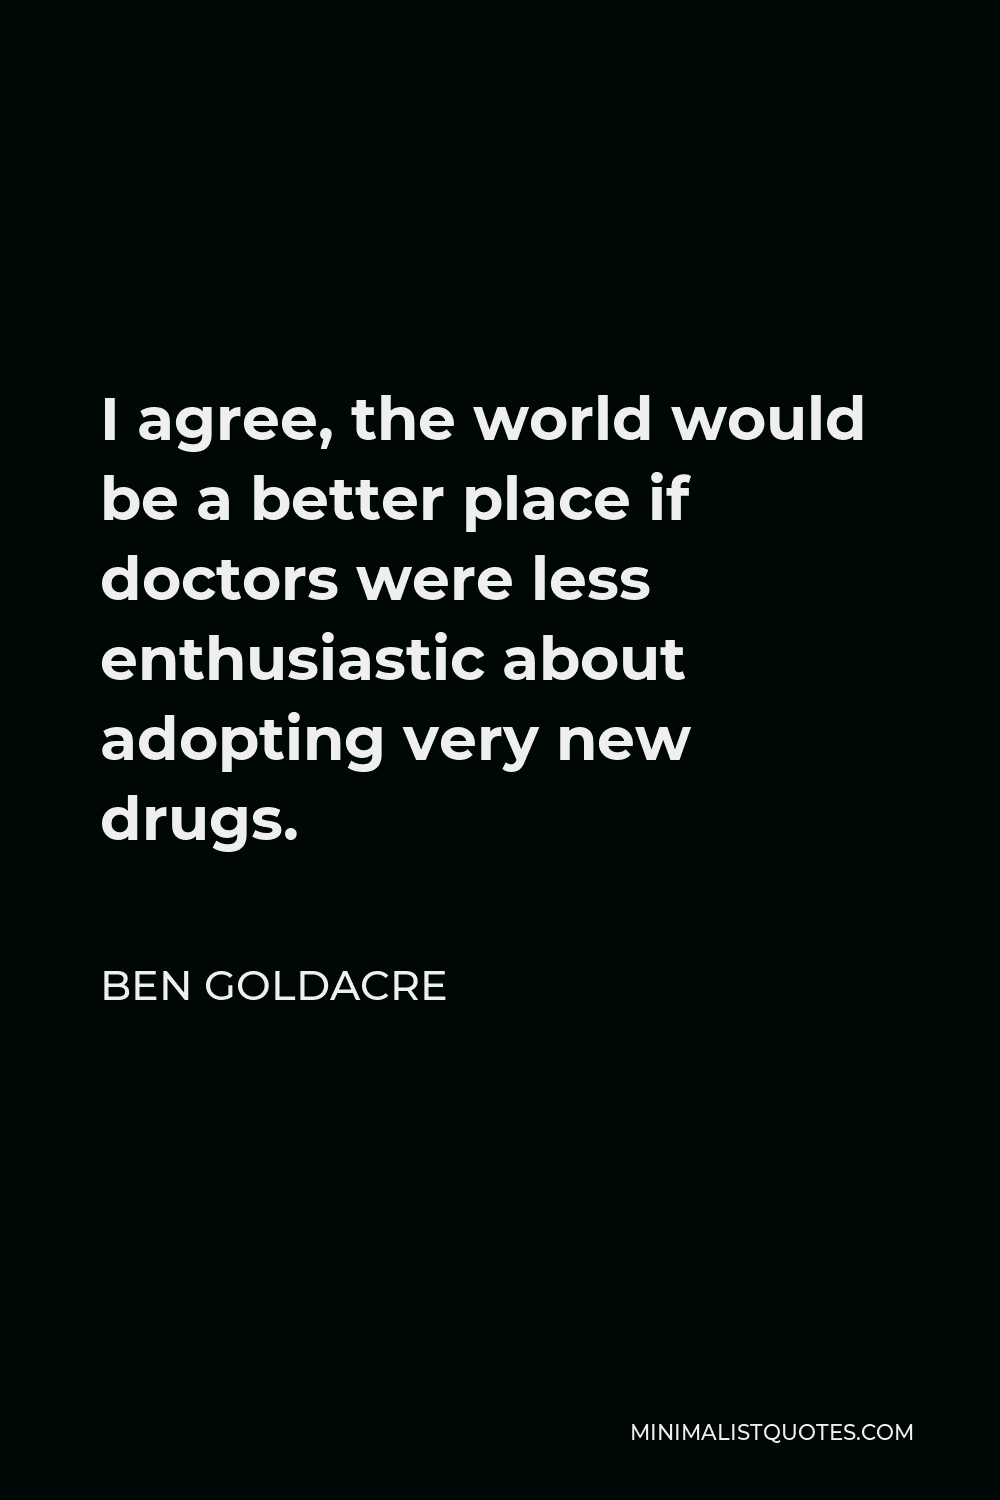 Ben Goldacre Quote - I agree, the world would be a better place if doctors were less enthusiastic about adopting very new drugs.